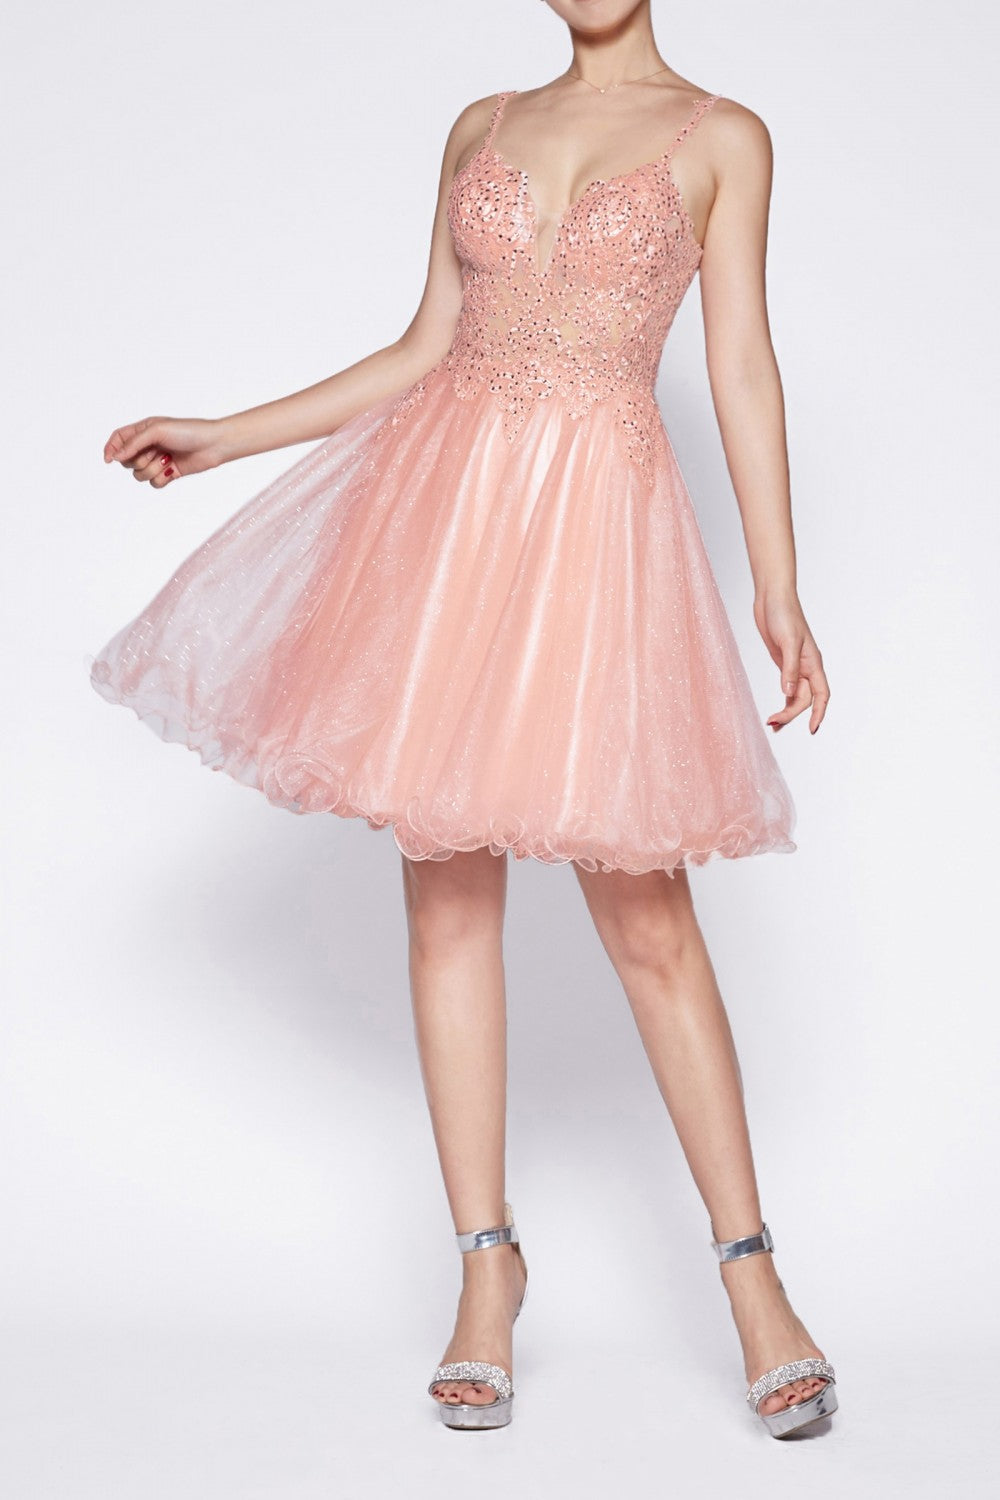 MyFashion.com - A-line short dress with glitter tulle and jewled lace bodice.(CD0137) - Cinderella Divine promdress eveningdress fashion partydress weddingdress 
 gown homecoming promgown weddinggown 